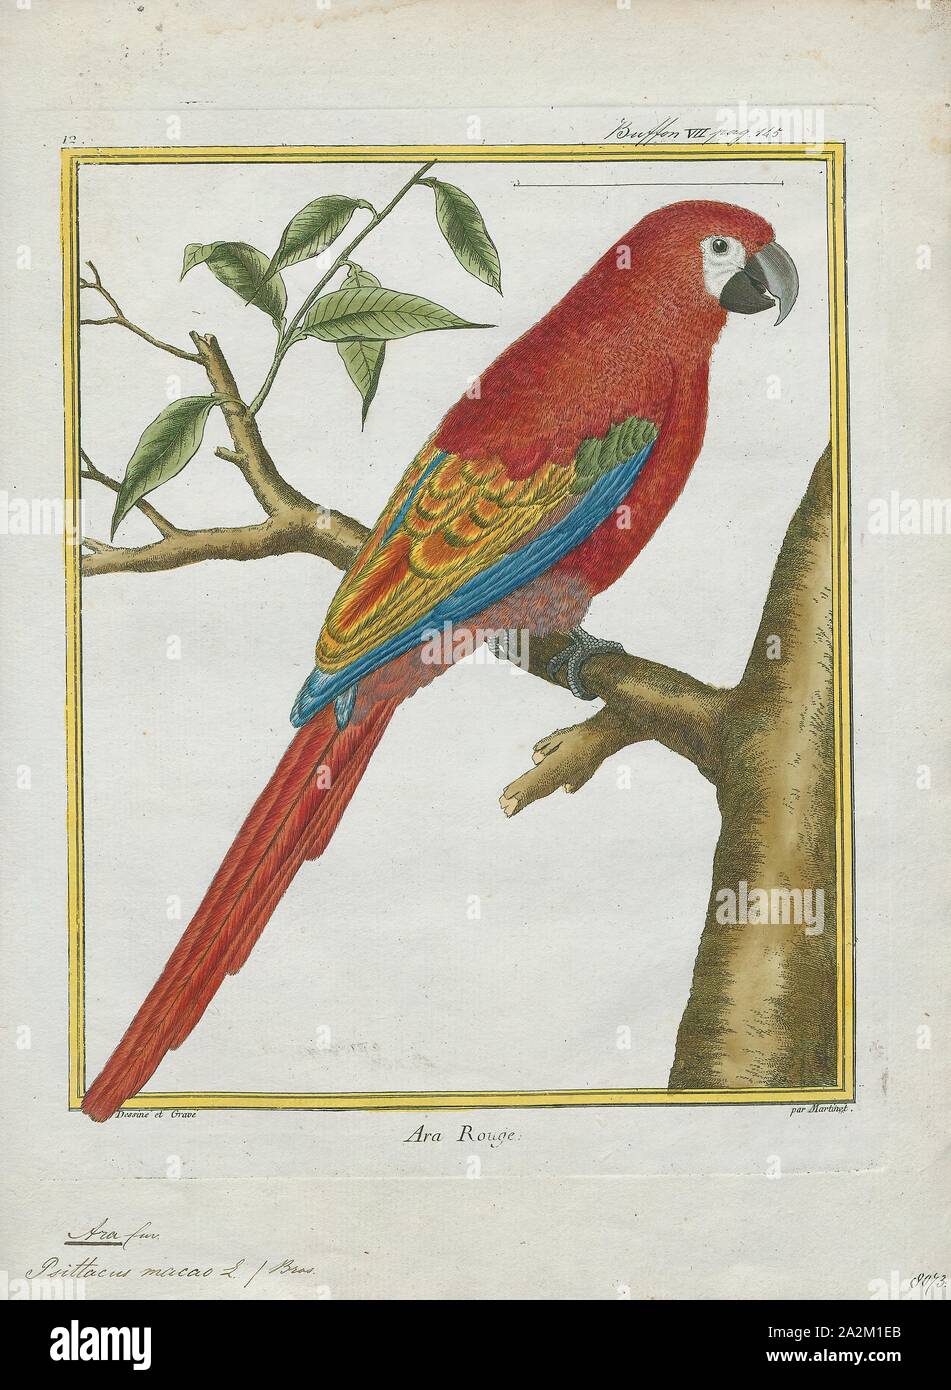 Ara macao, Print, The scarlet macaw (Ara macao) is a large red, yellow, and blue Central and South American parrot, a member of a large group of Neotropical parrots called macaws. It is native to humid evergreen forests of tropical Central and South America. Range extends from south-eastern Mexico to the Peruvian Amazon, Colombia, Bolivia, Venezuela and Brazil in lowlands of 500 m (1, 640 ft) (at least formerly) up to 1, 000 m (3, 281 ft). In some areas, it has suffered local extinction because of habitat destruction or capture for the parrot trade, but in other areas it remains fairly common Stock Photo